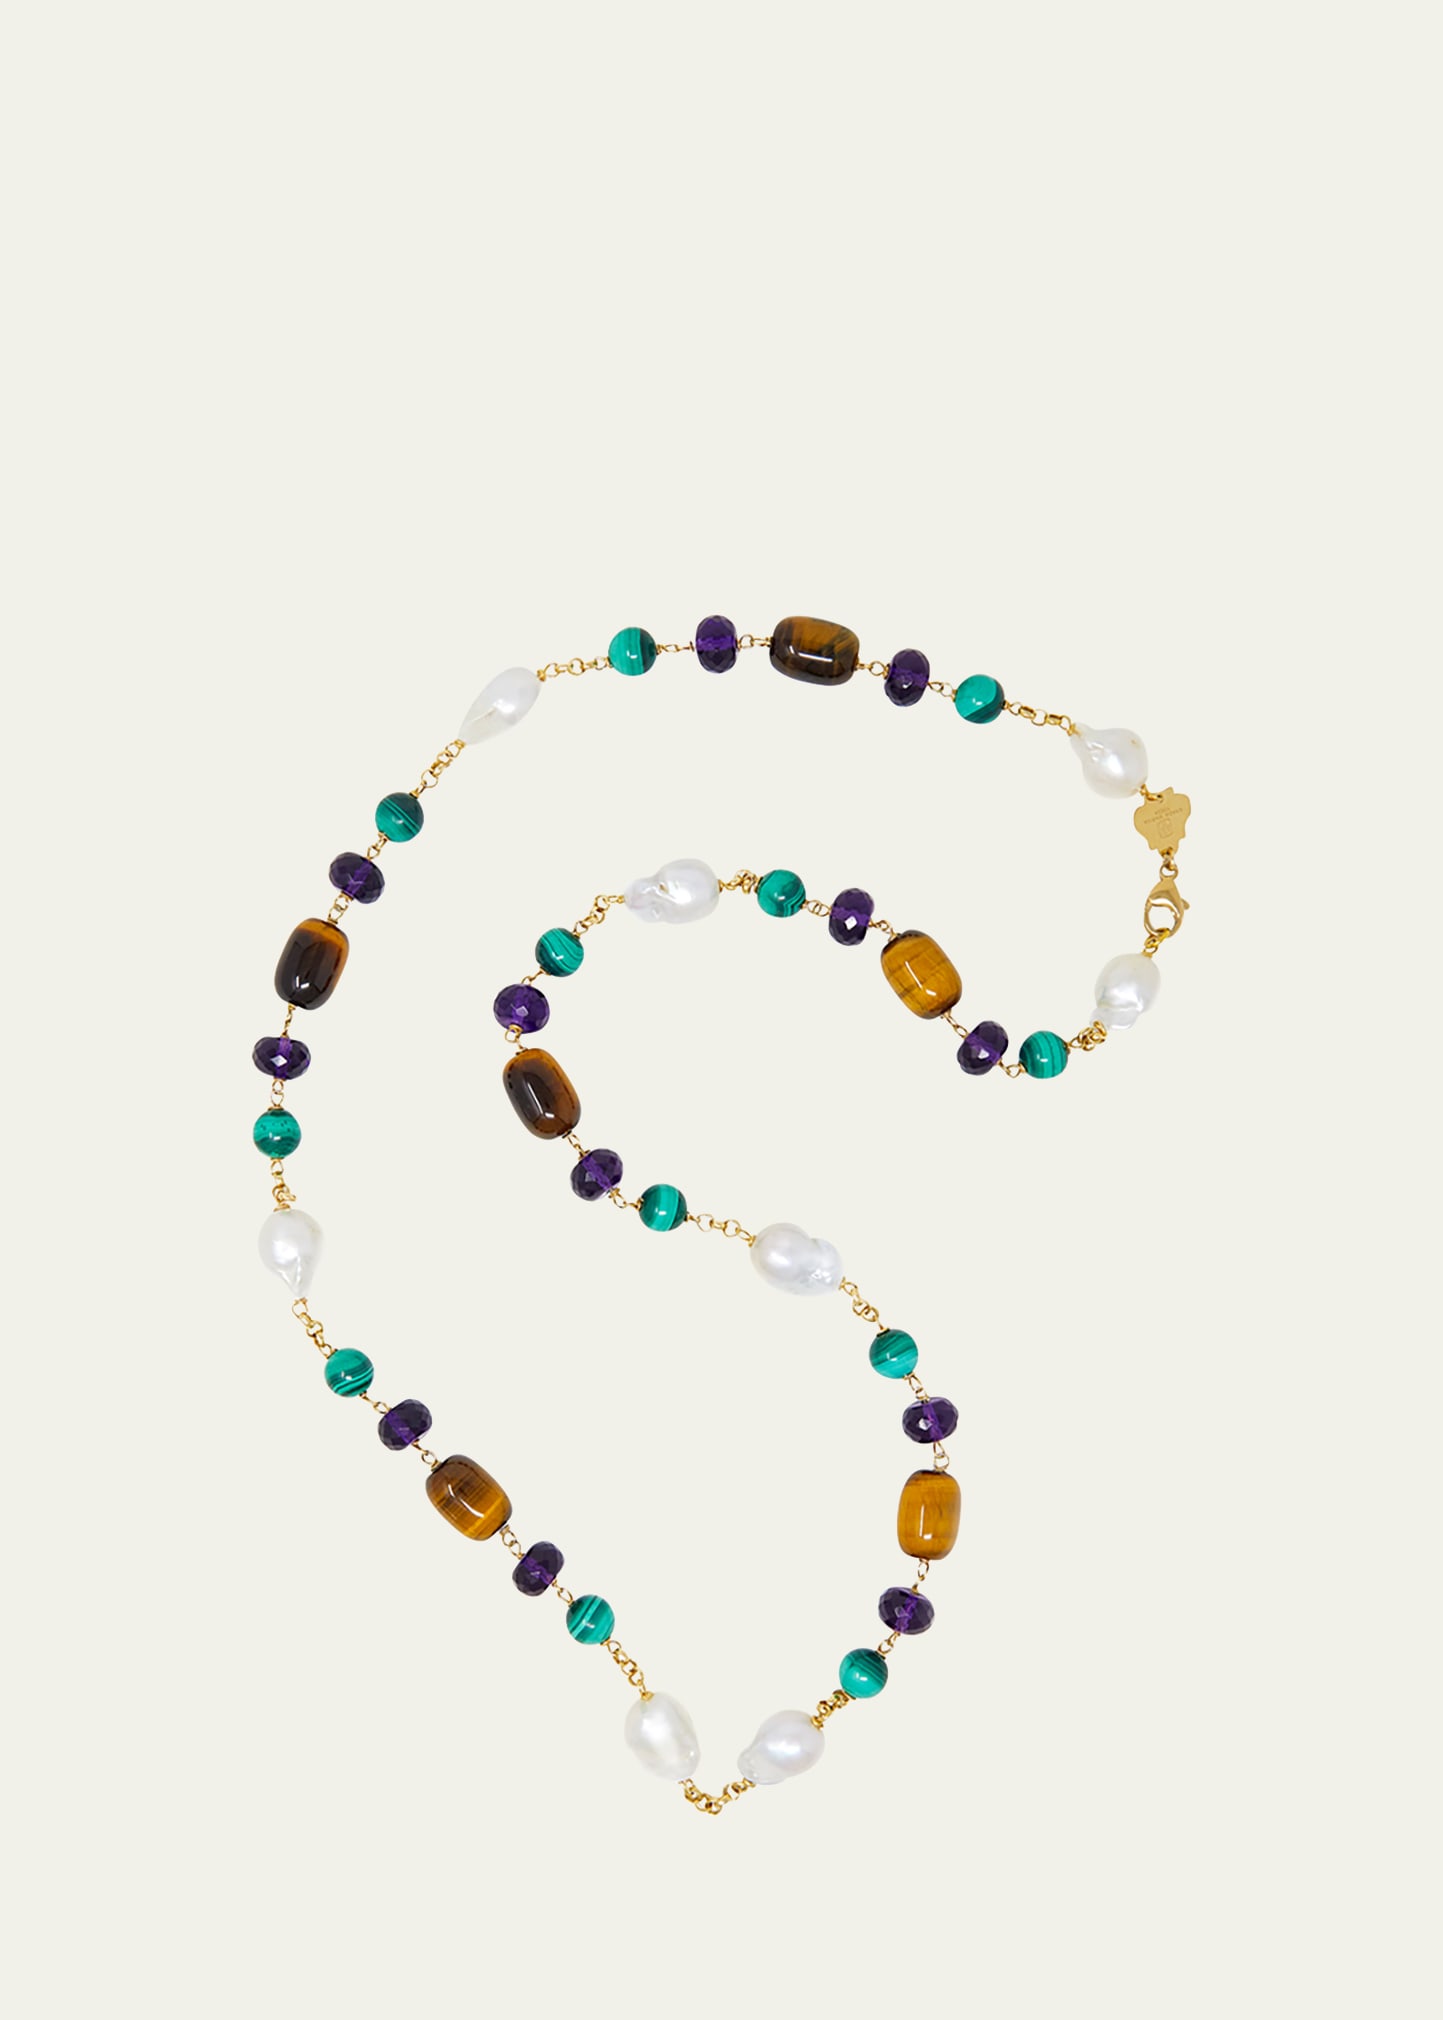 Grazia And Marica Vozza 18k Yellow Gold Freshwater Baroque Pearl Necklace With Malachite, Amethyst And Tigers Eye In Multi